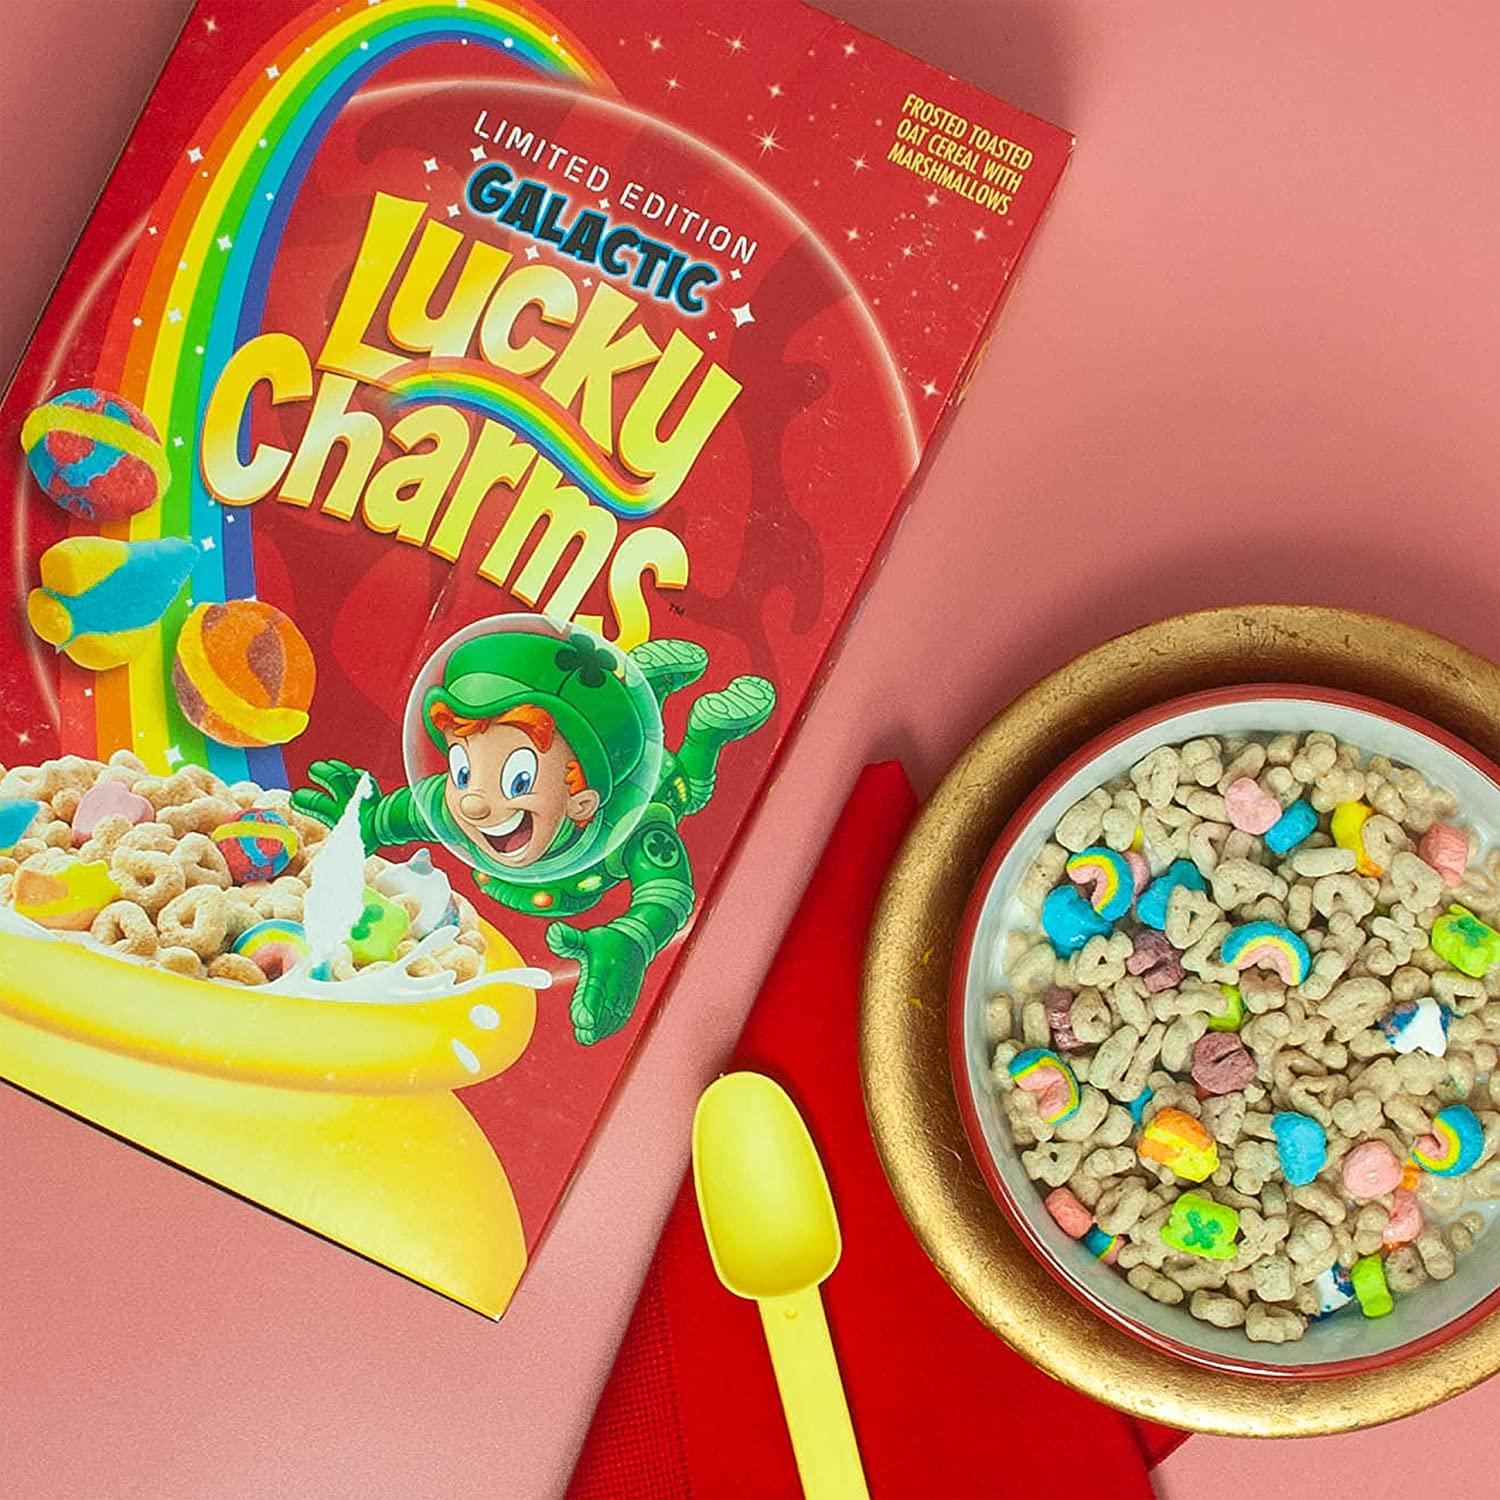 Chocolate Lucky Charms, Marshmallow Cereal with Unicorns, Whole